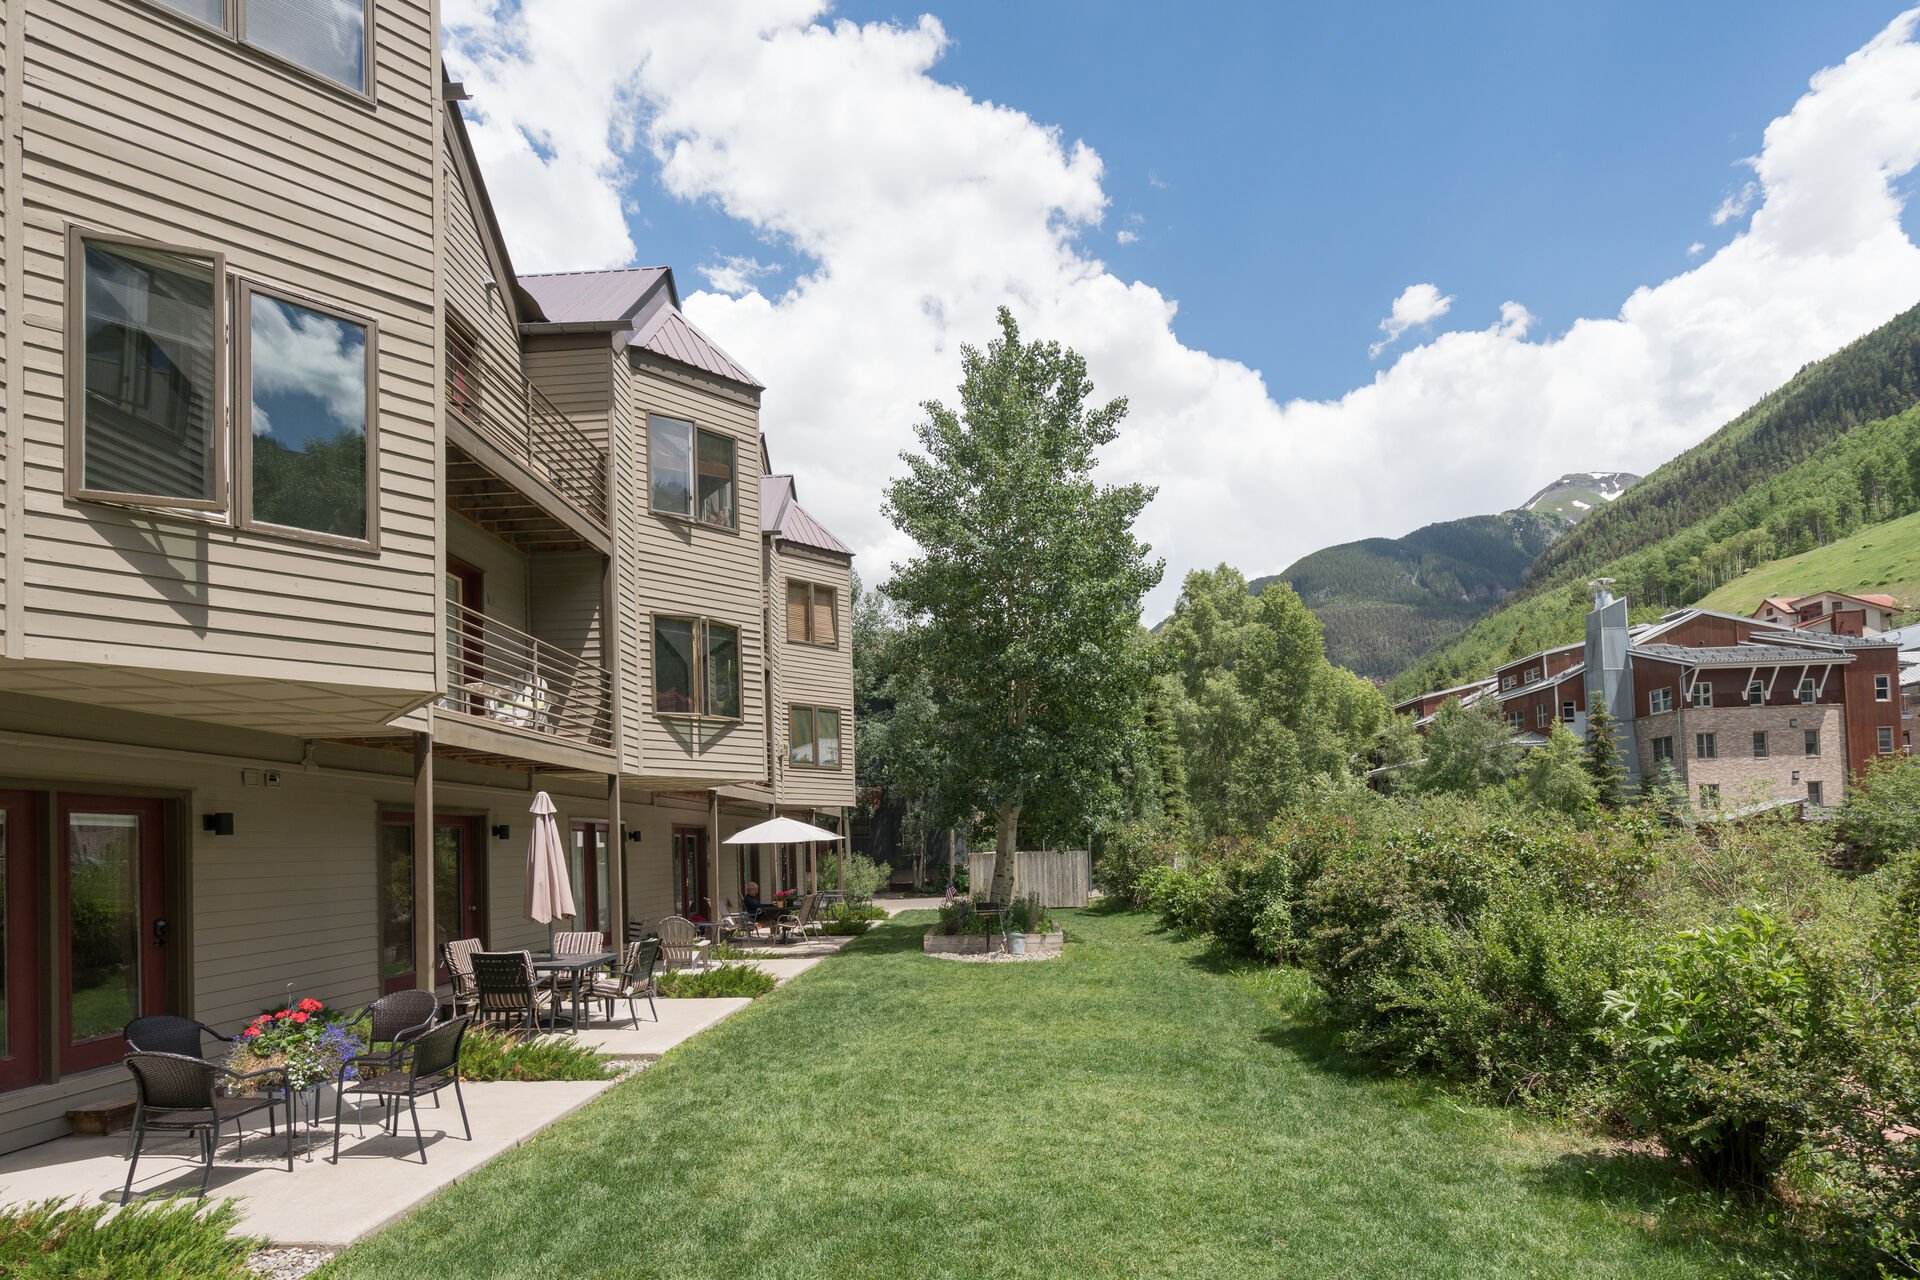 Outside view from our Telluride studio rental